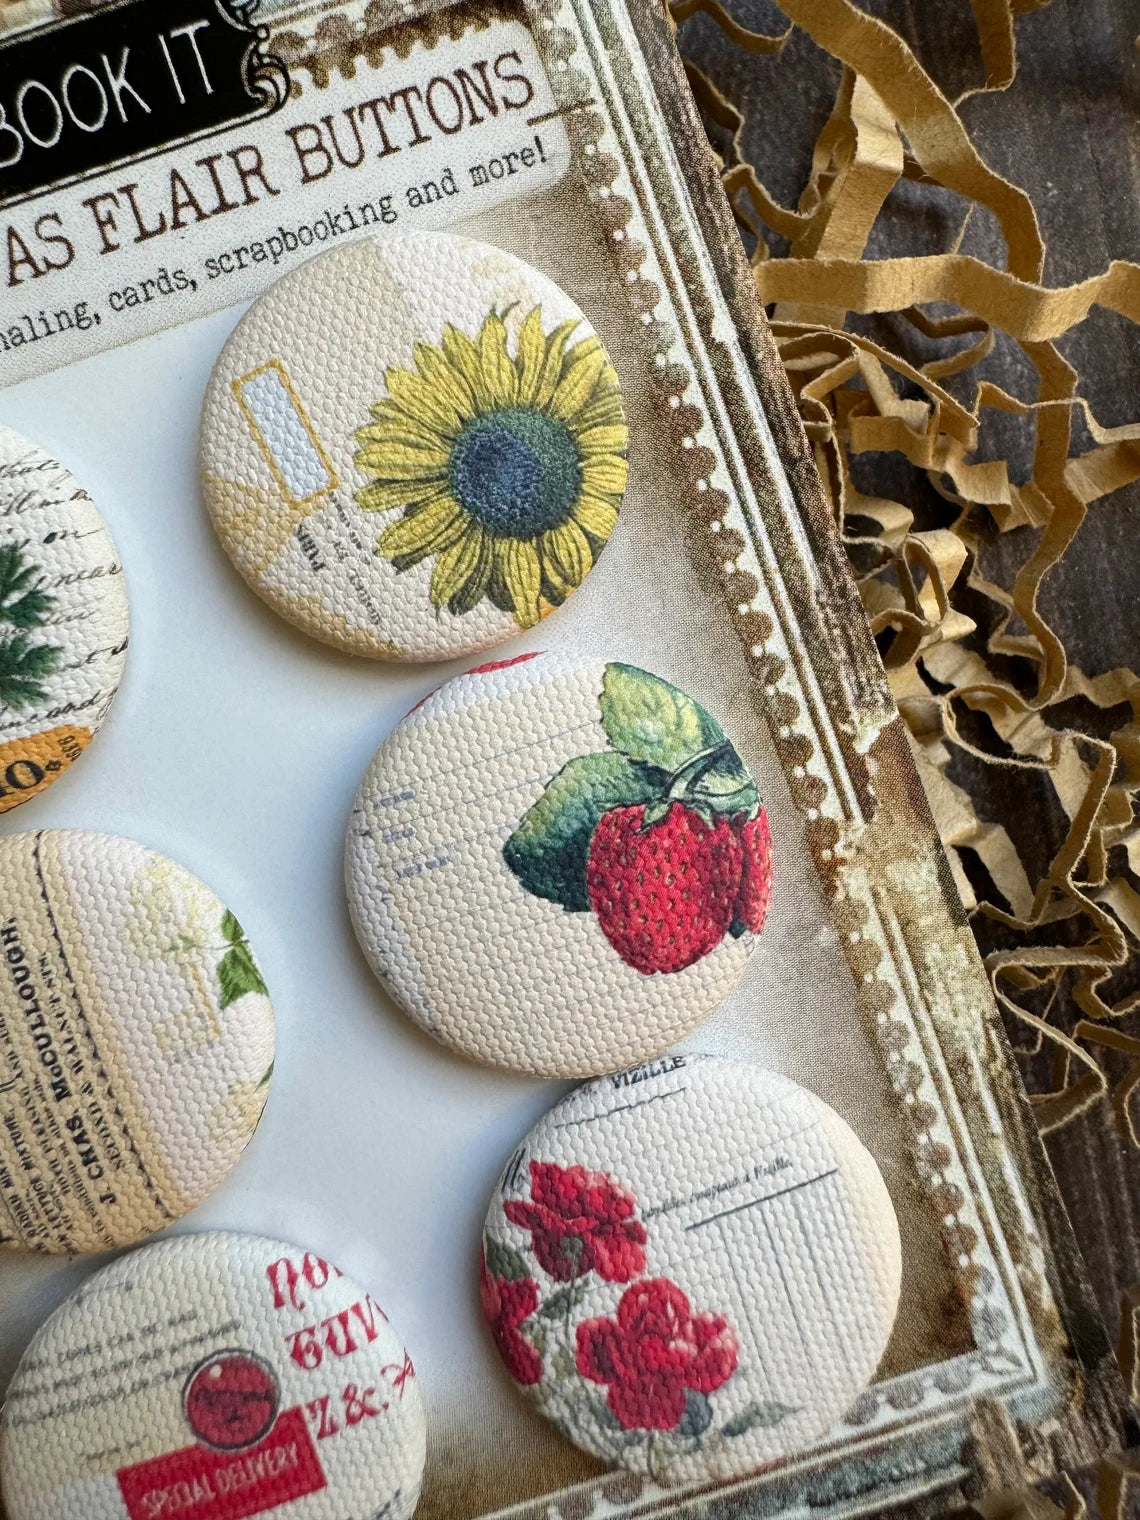 Vintage Seeds And Flowers Canvas Flair Buttons